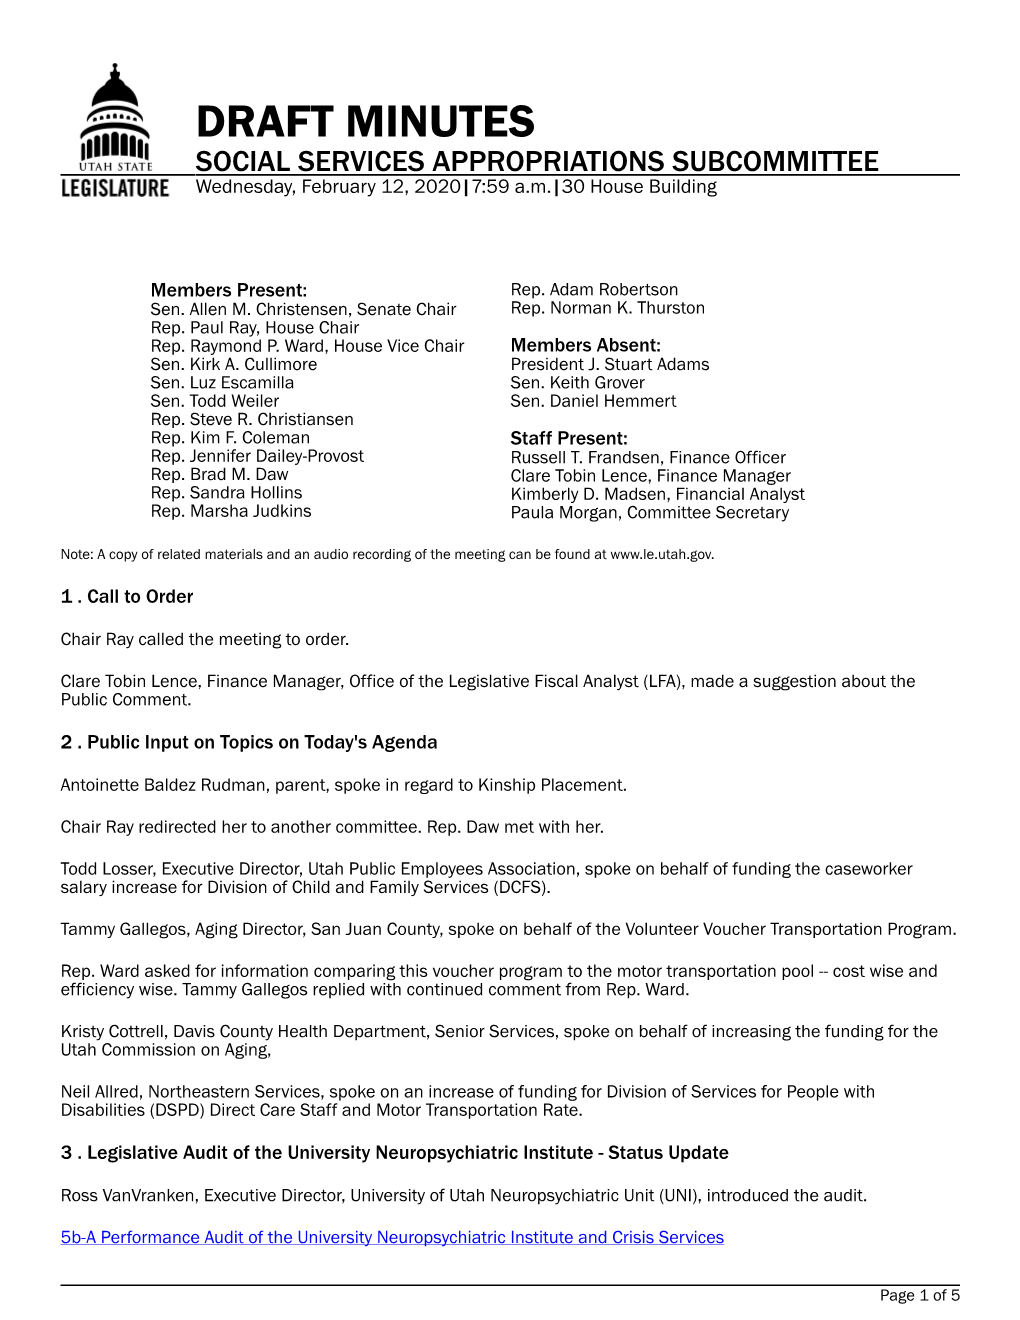 DRAFT MINUTES SOCIAL SERVICES APPROPRIATIONS SUBCOMMITTEE Wednesday, February 12, 2020|7:59 A.M.|30 House Building